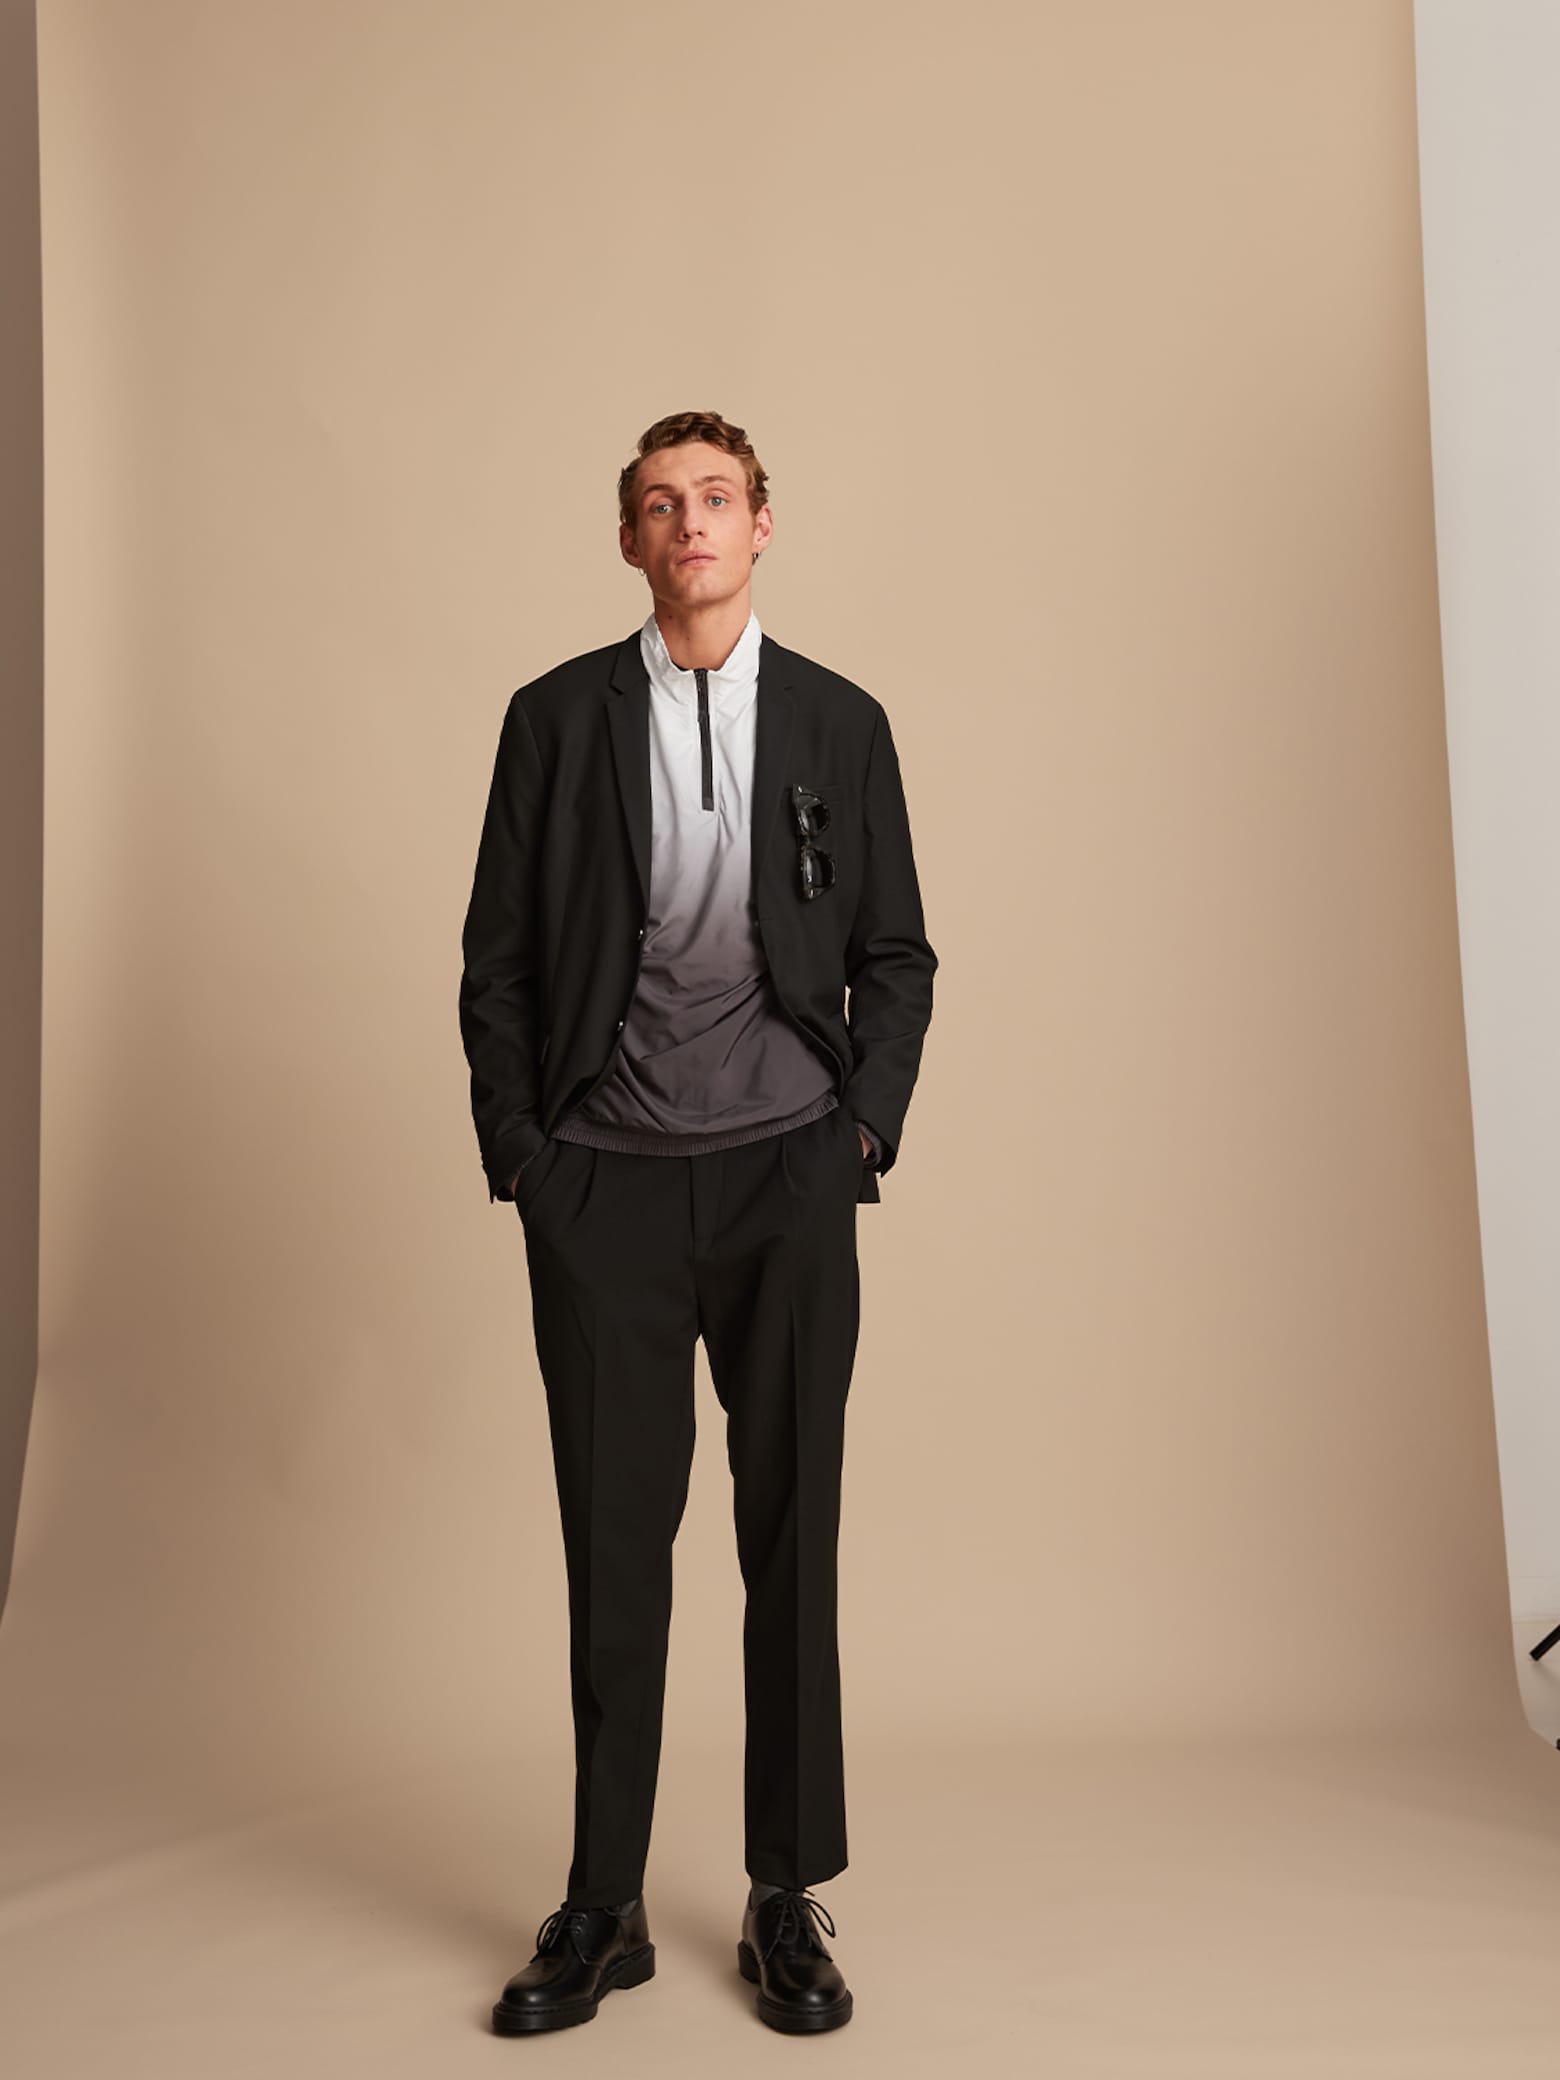 Suit up The ultimate suit guide